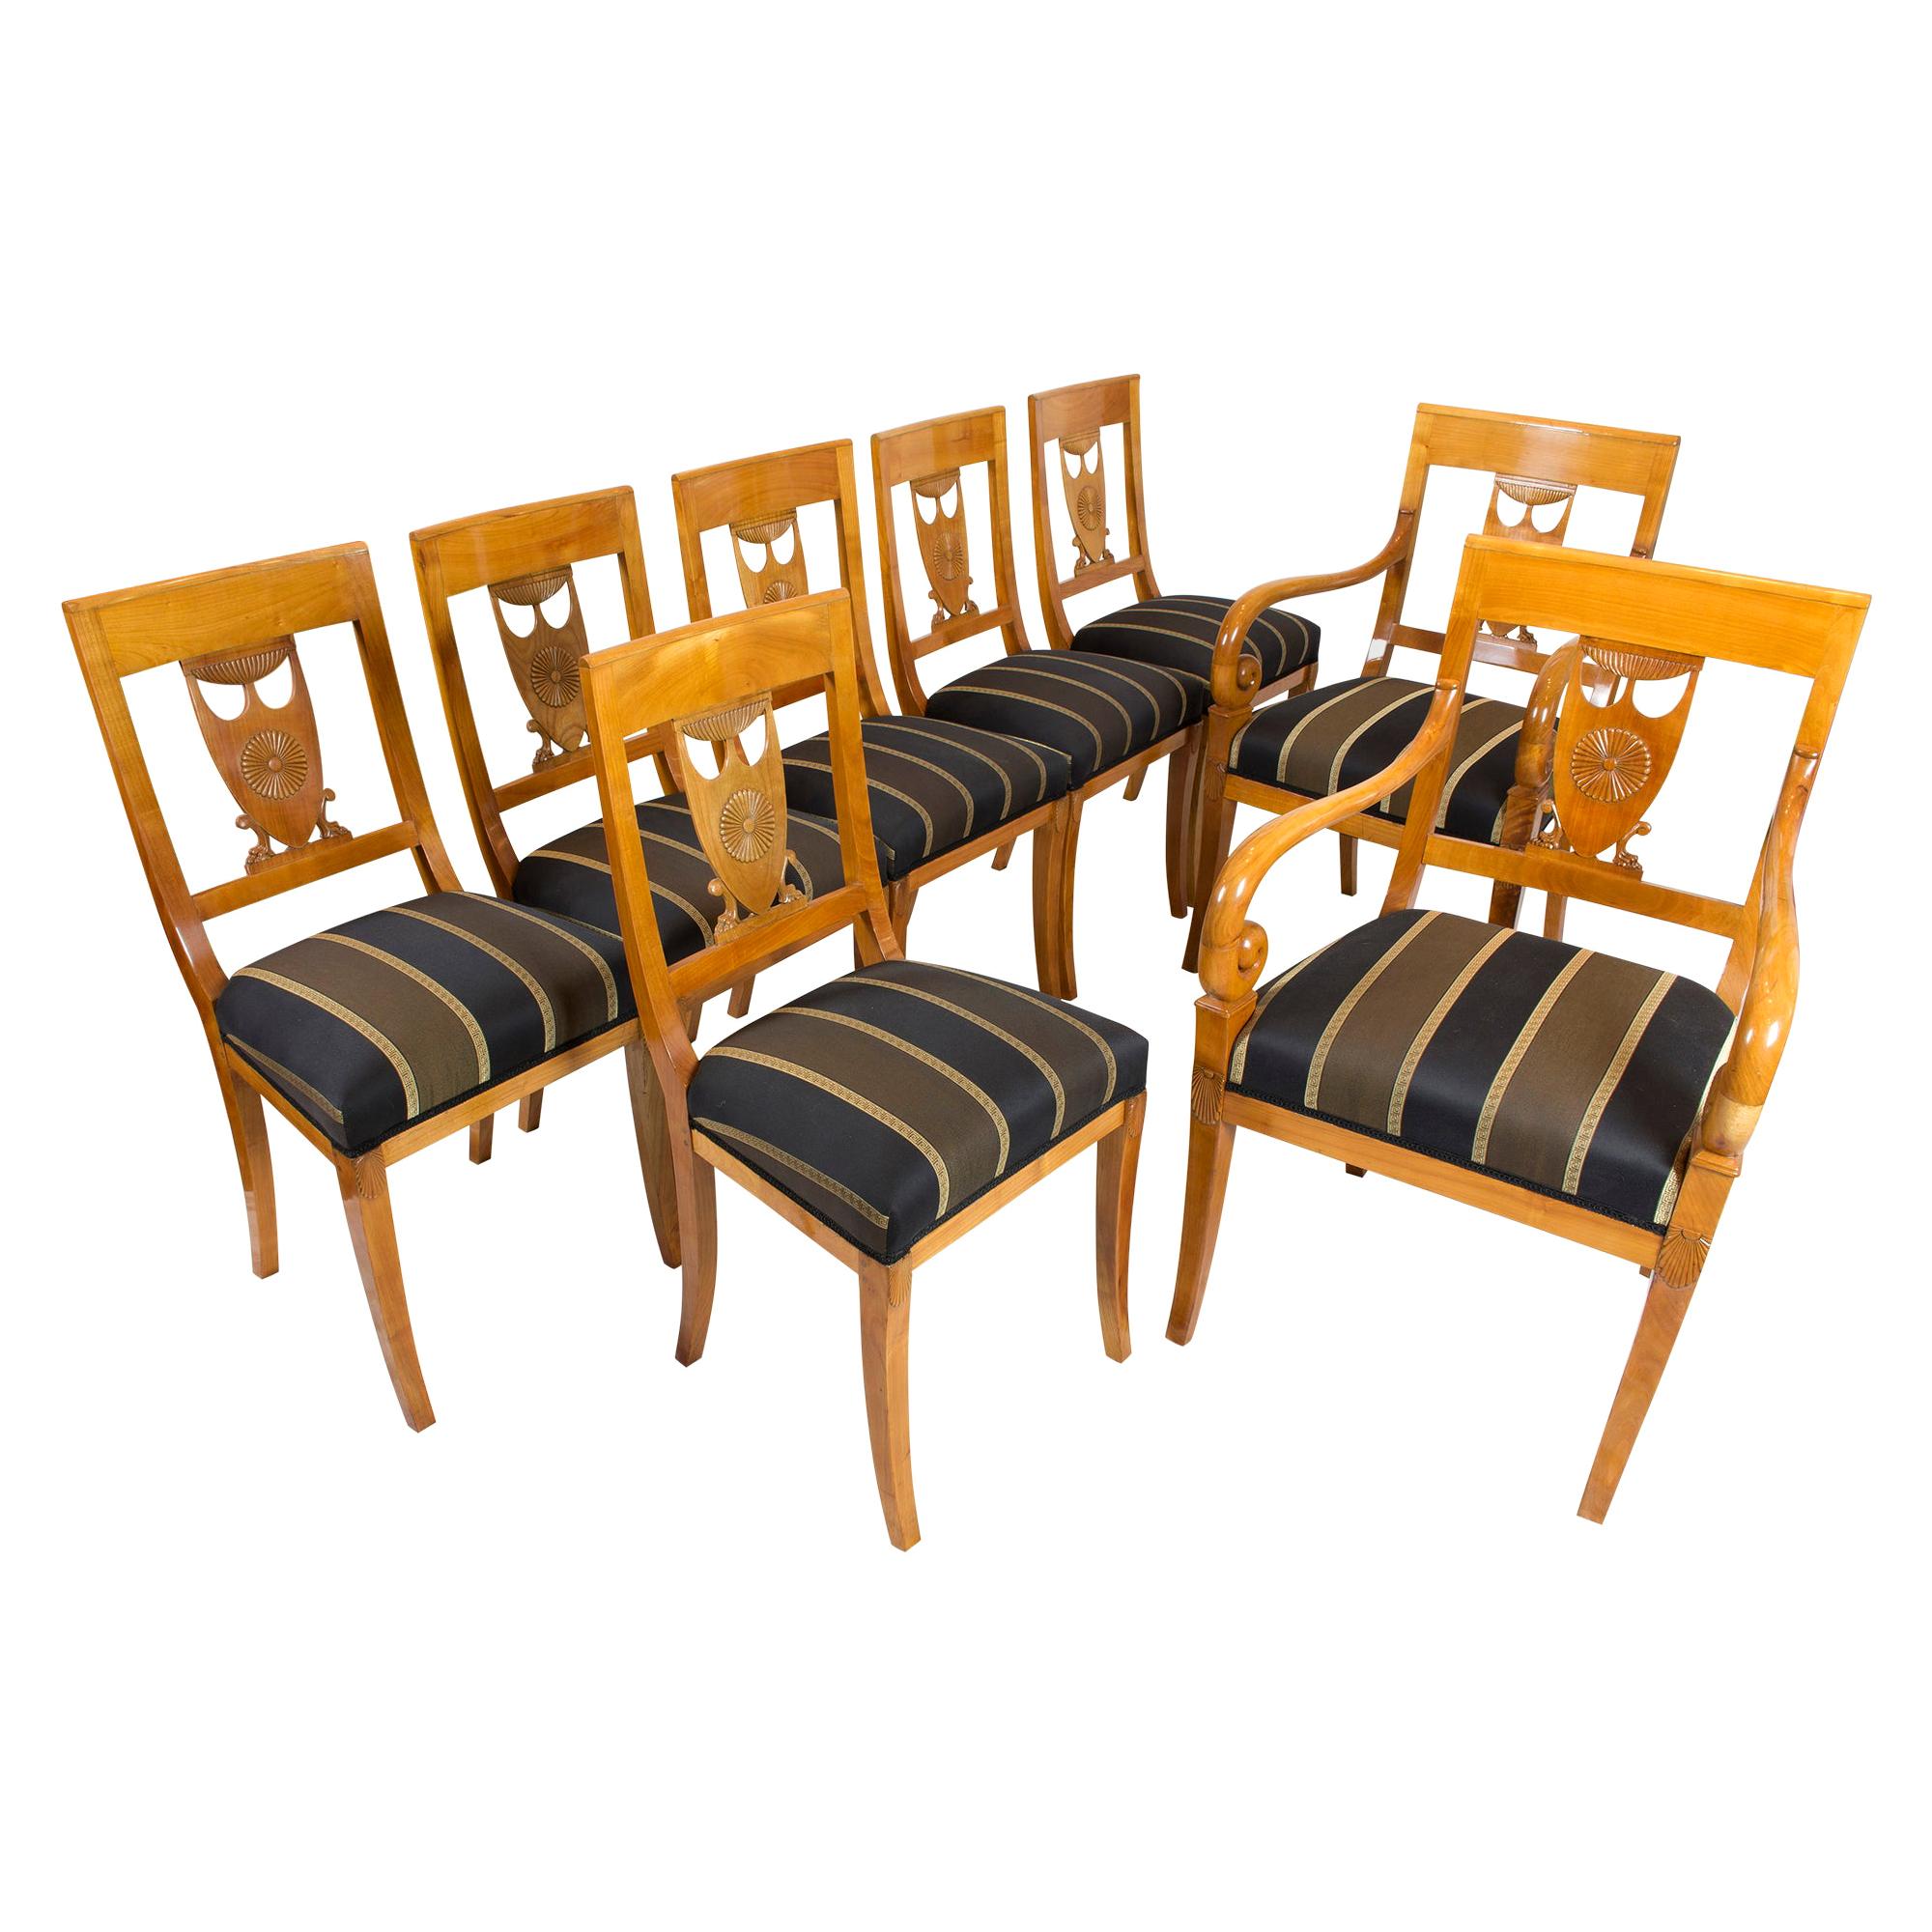 Early 19th Century, Empire Cherrywood Seating Group, 2 Armchairs and 6 Chairs